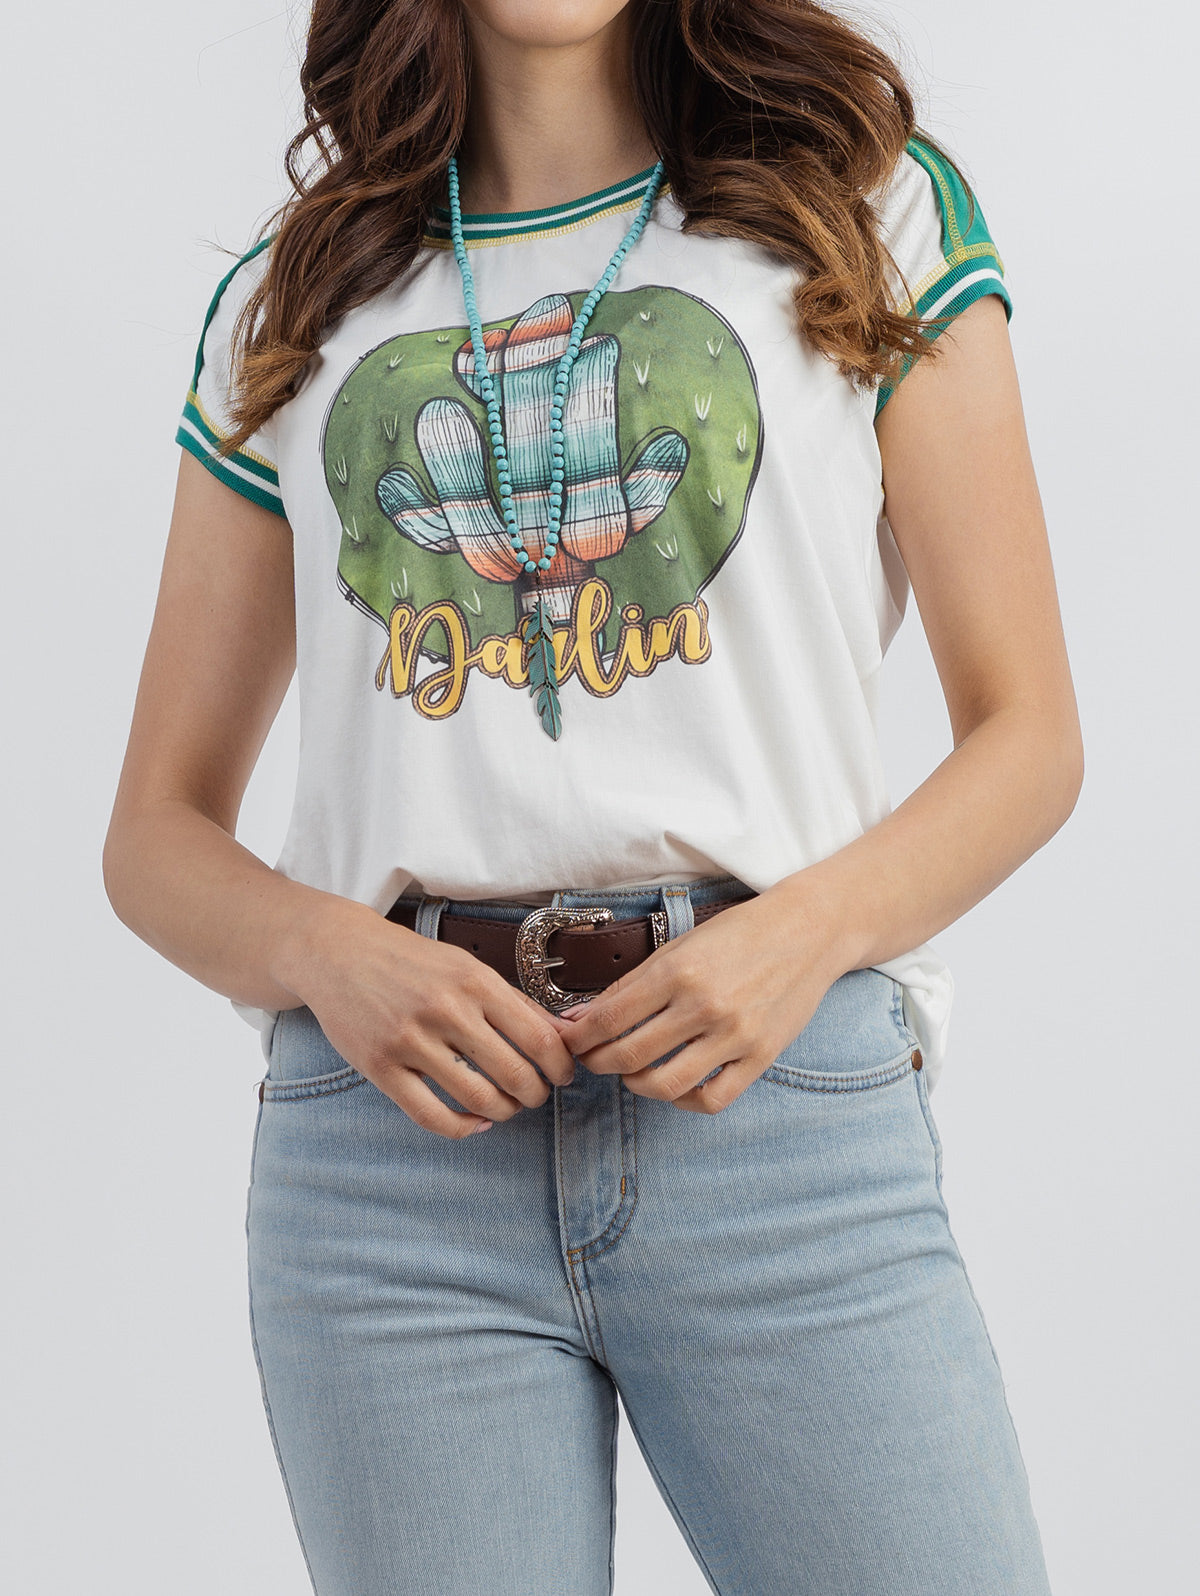 Women's Mineral Wash Contrast Stitched Cactus Graphic Print Short Sleeve Tee - Cowgirl Wear